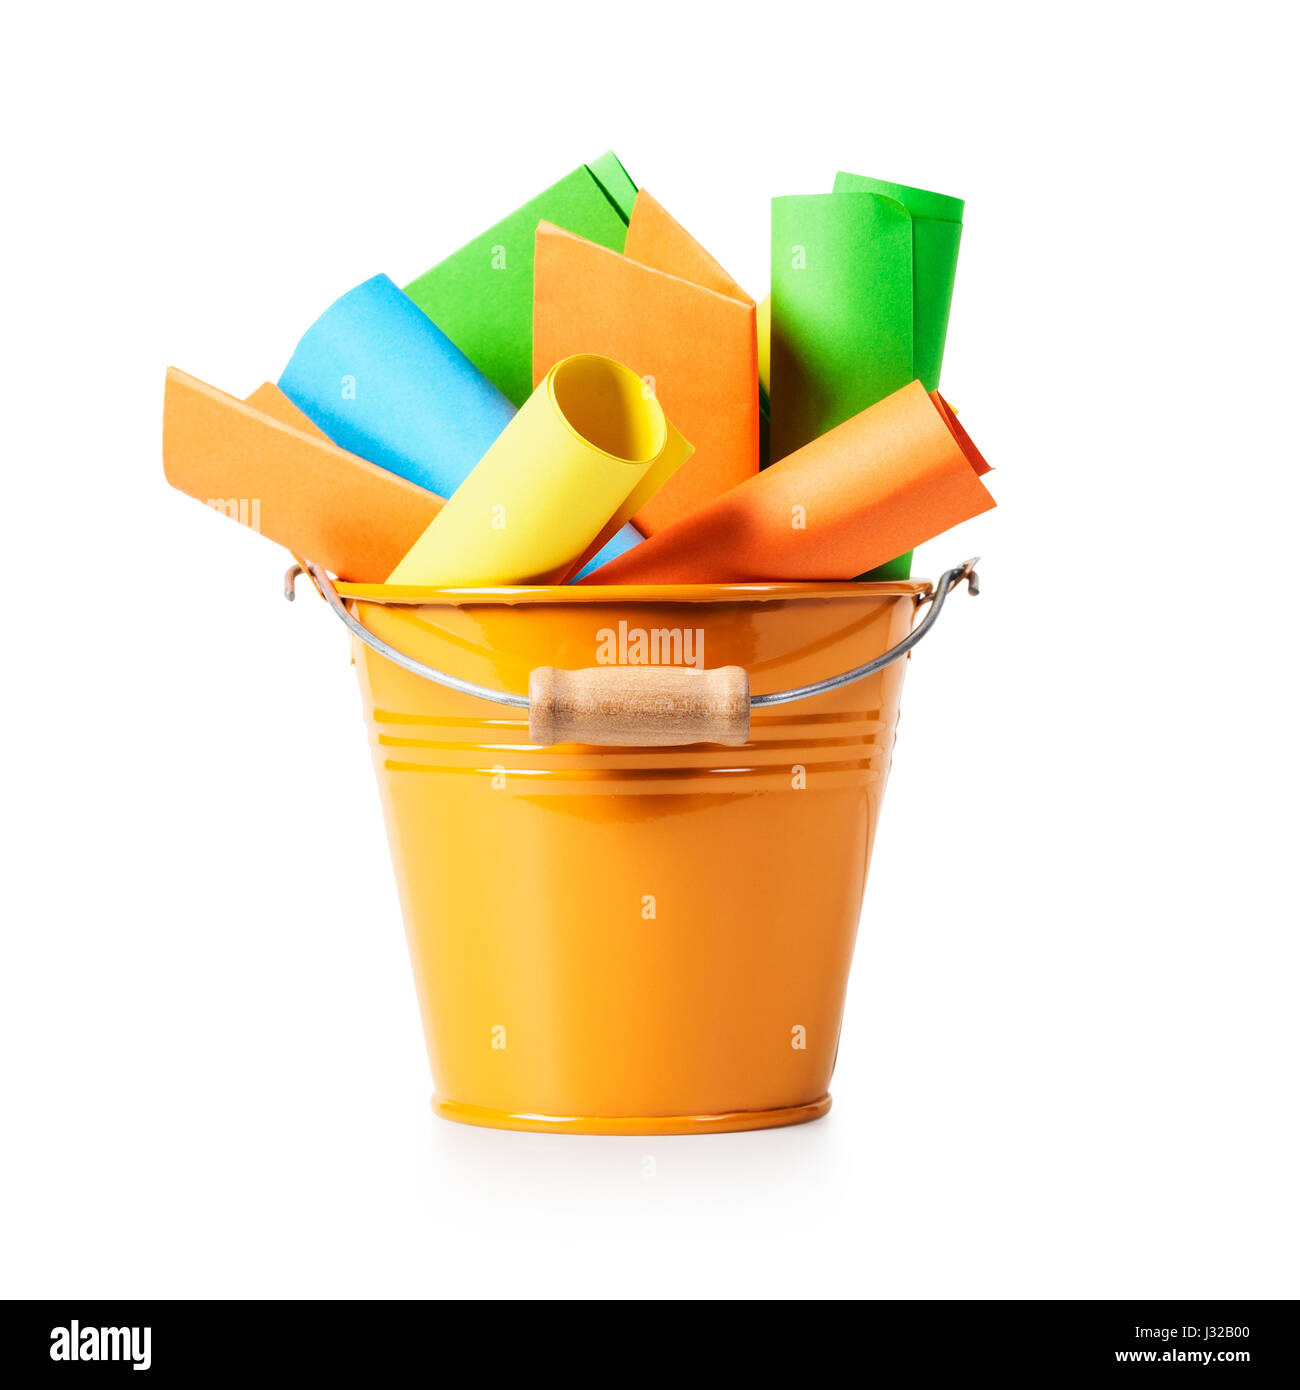 Orange bucket list with colorful paper notes isolated on white background clipping path included Stock Photo